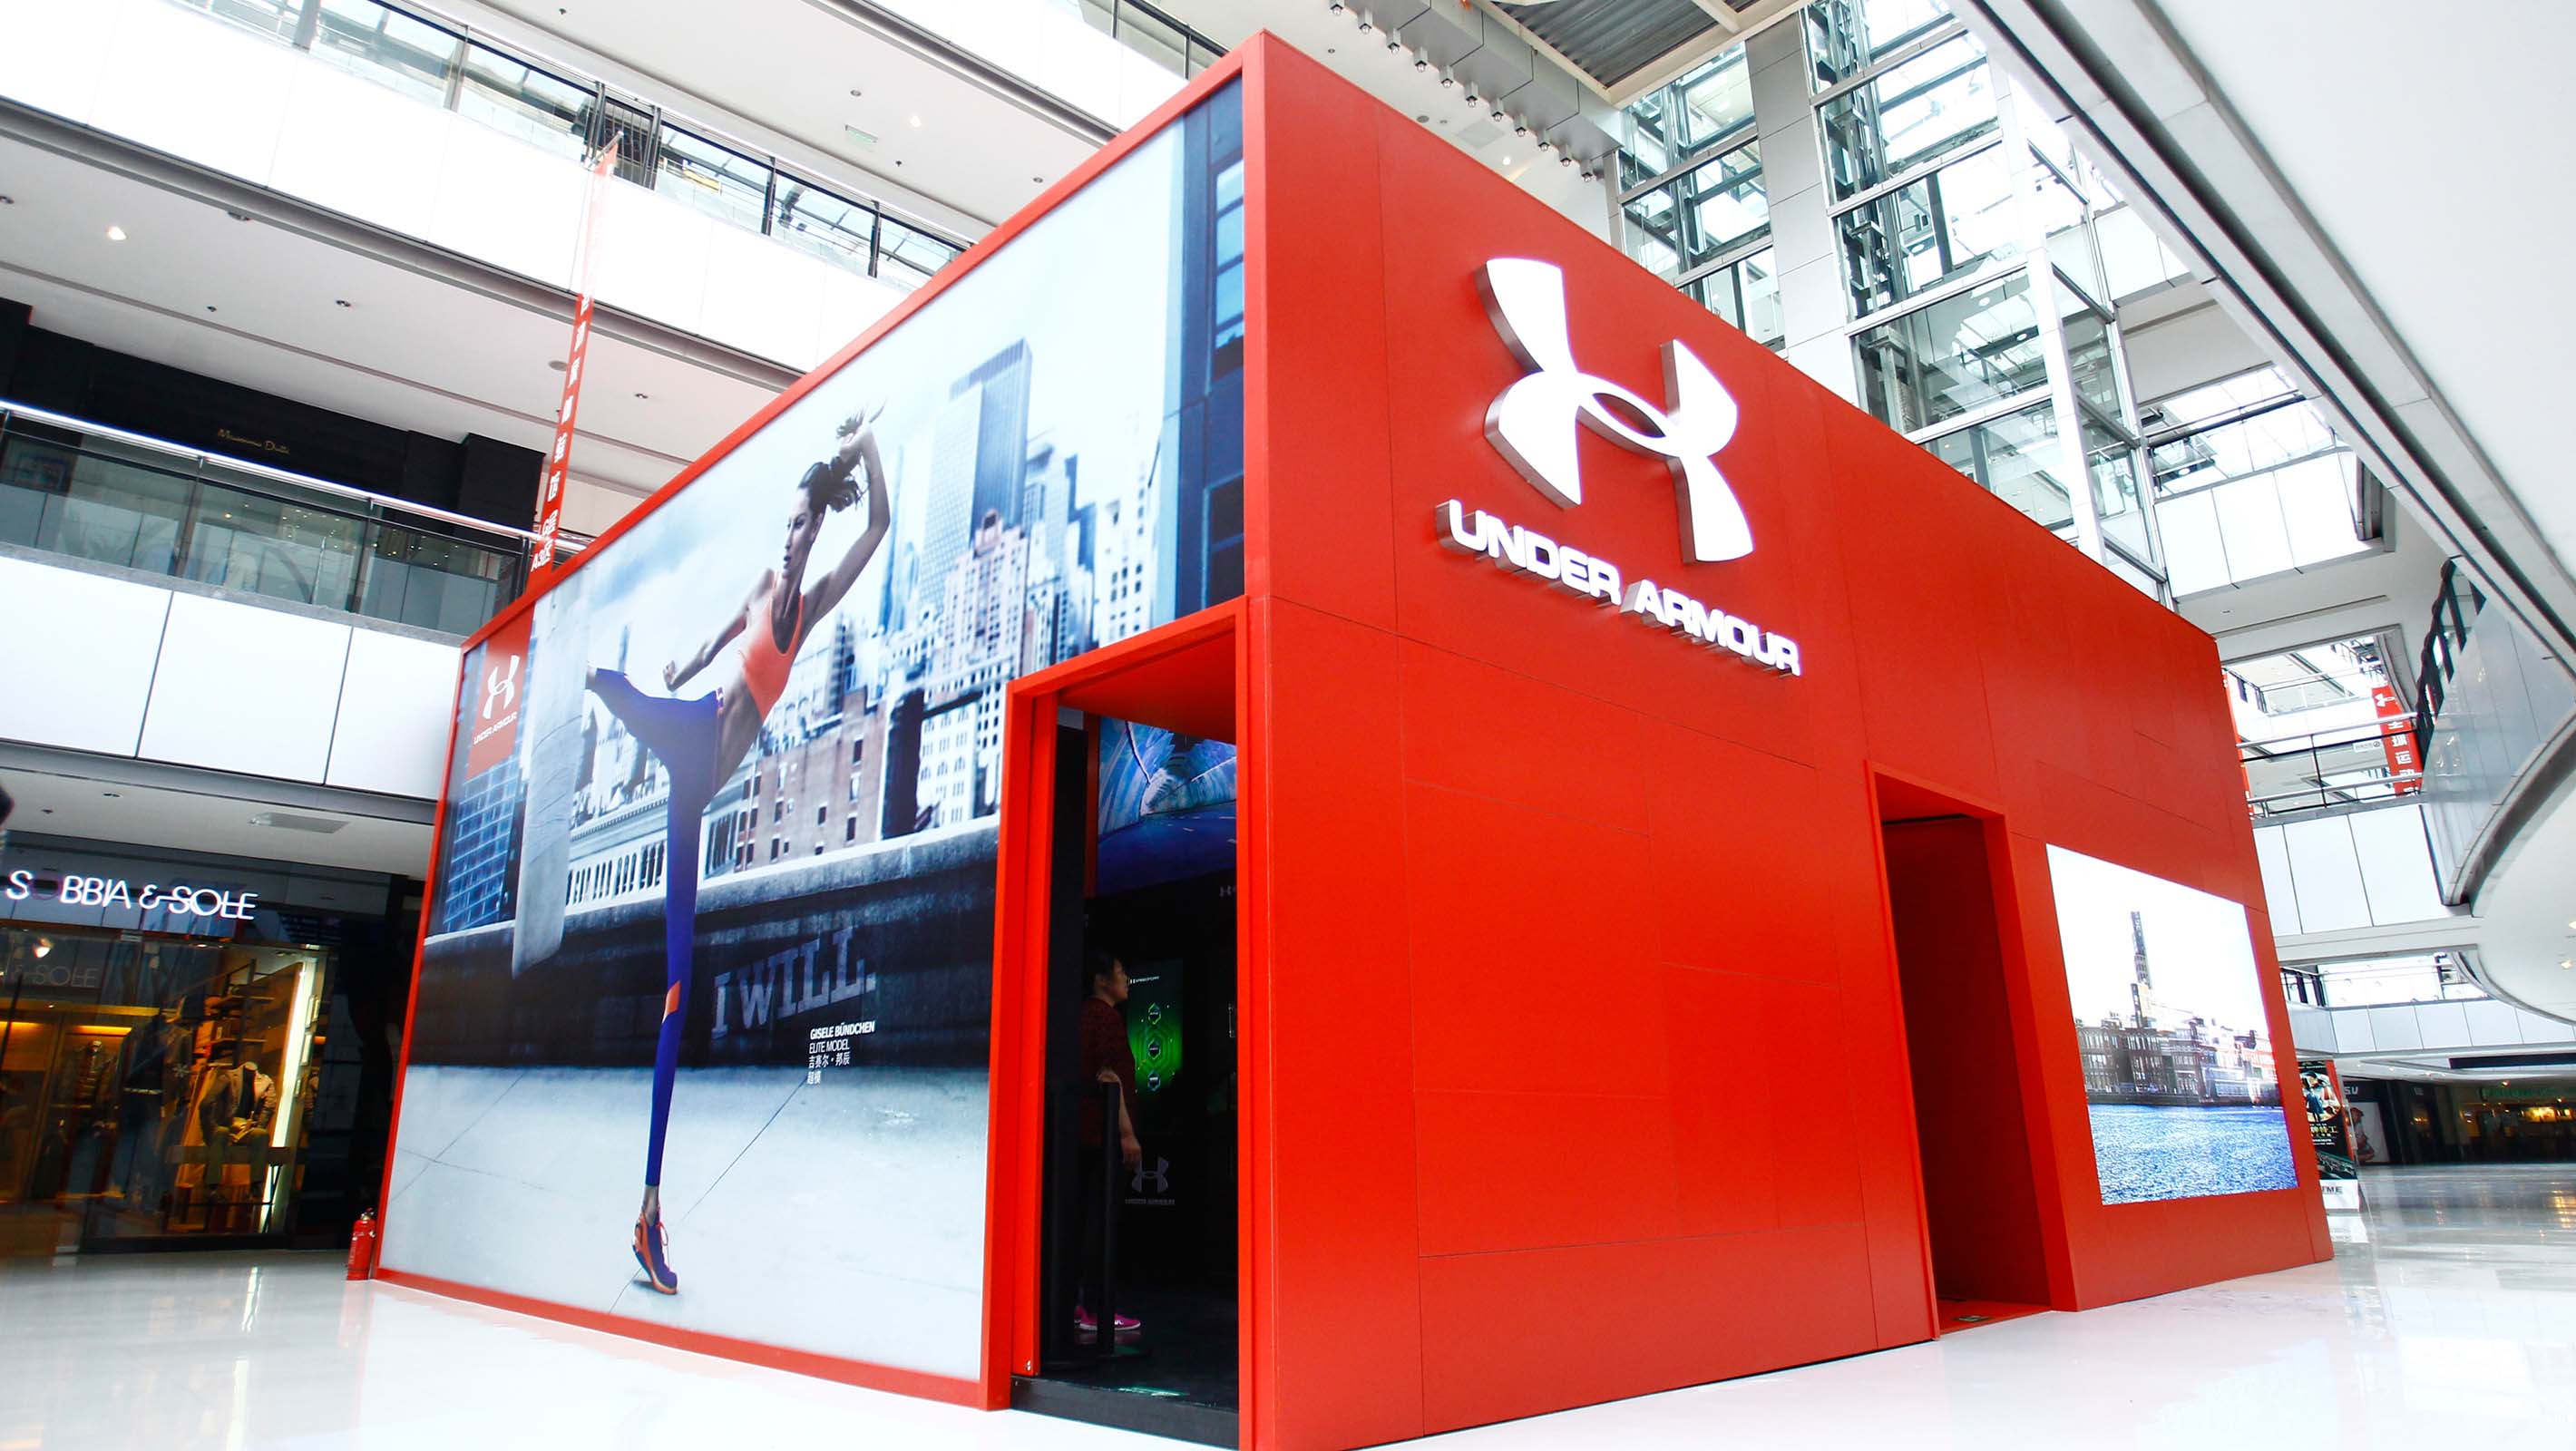 Under Armour - Brand Experience